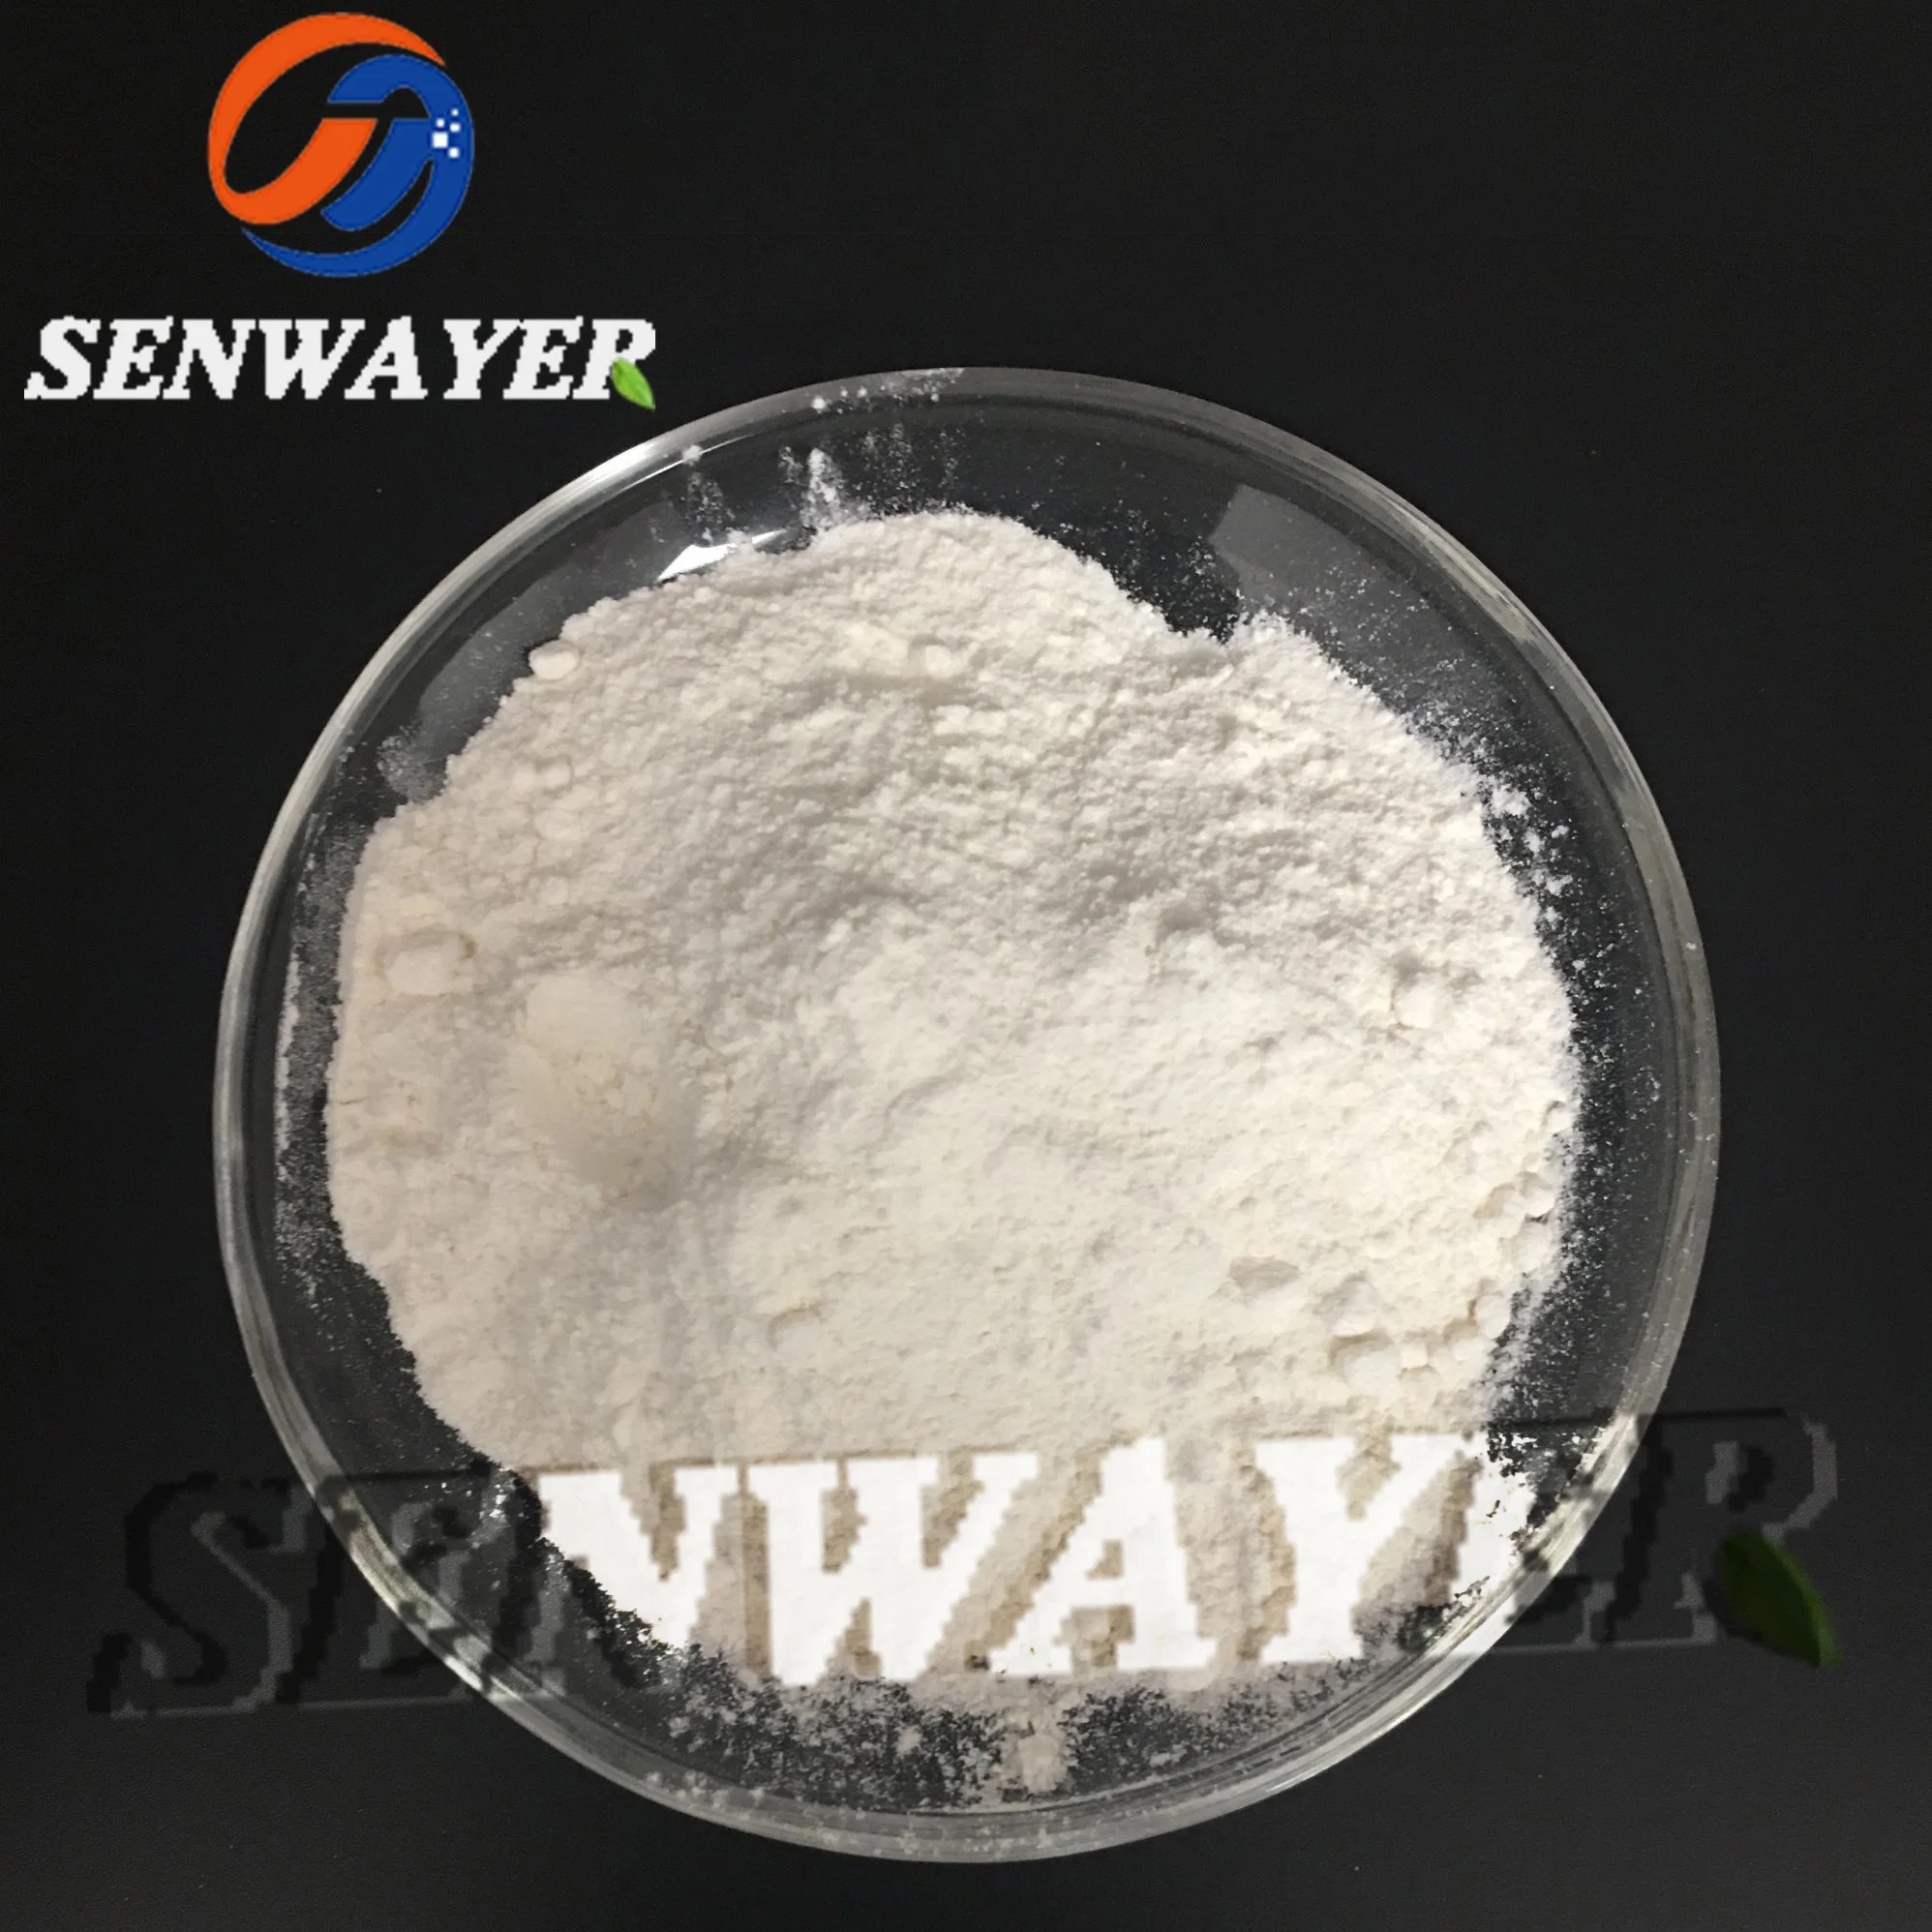 Hot Sale! Factory Supply High Quality Rapamycin/Sirolimus Raw Materials CAS 53123-88-9 Senwayer with Best Price